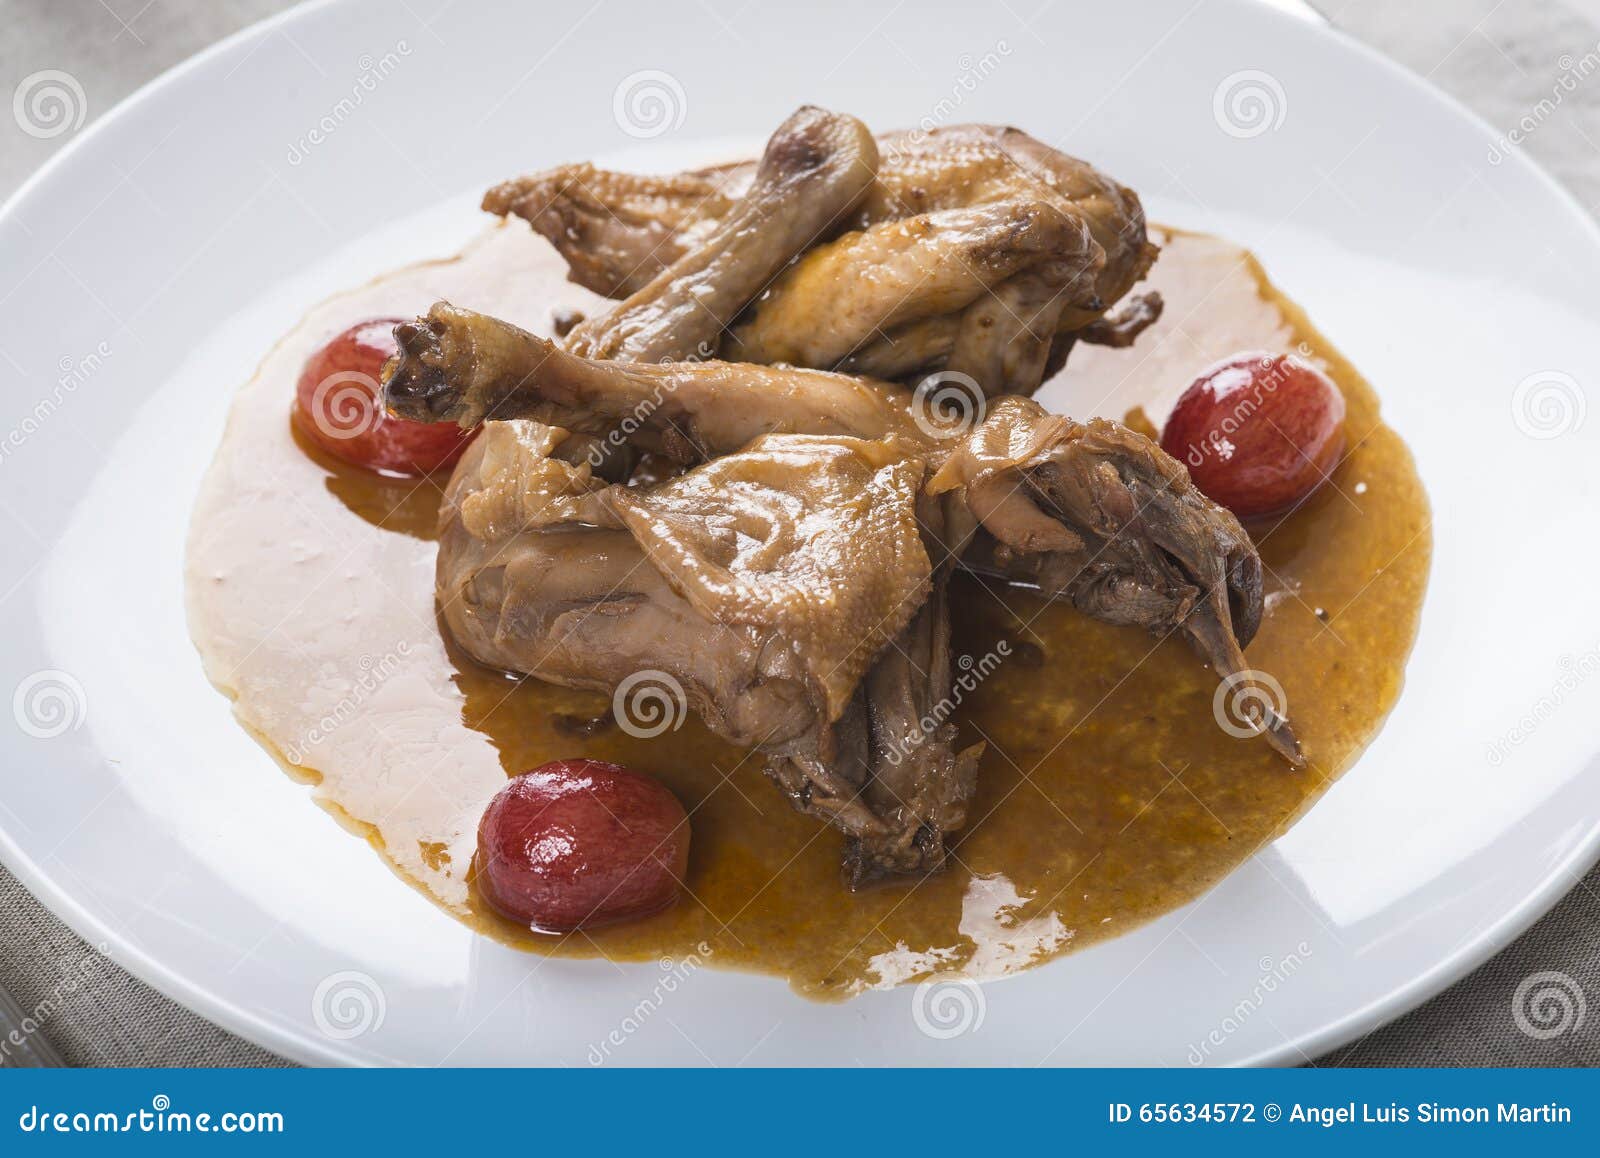 poussin with grapes sauce